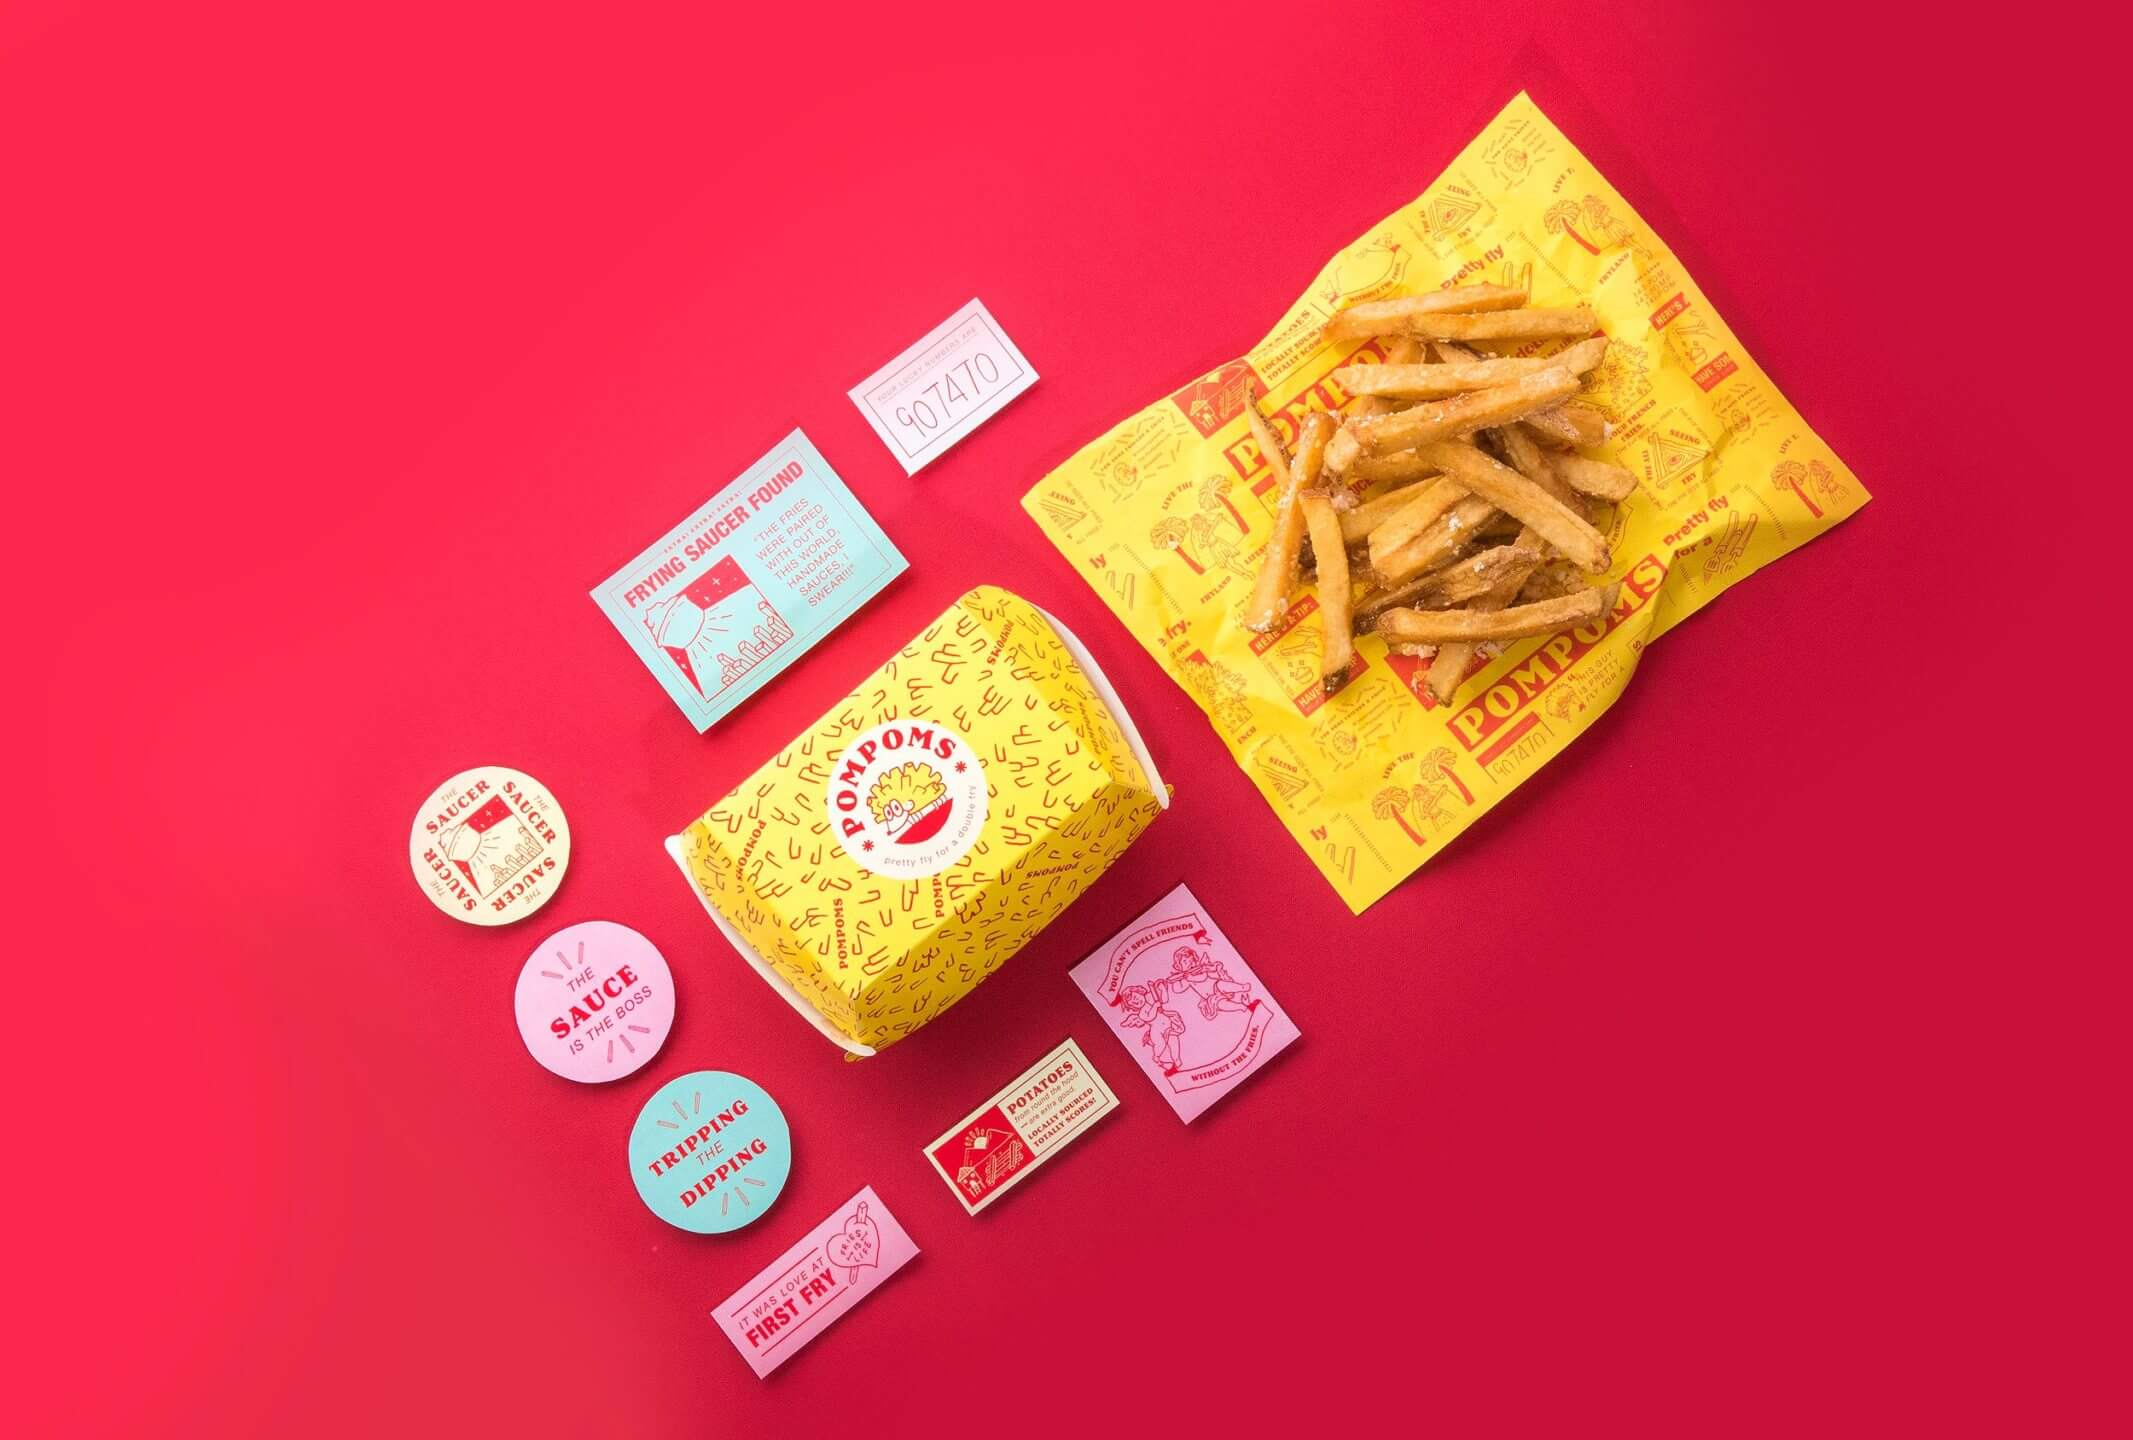 Fun quirky food packaging design for food and beverage brand Pompoms